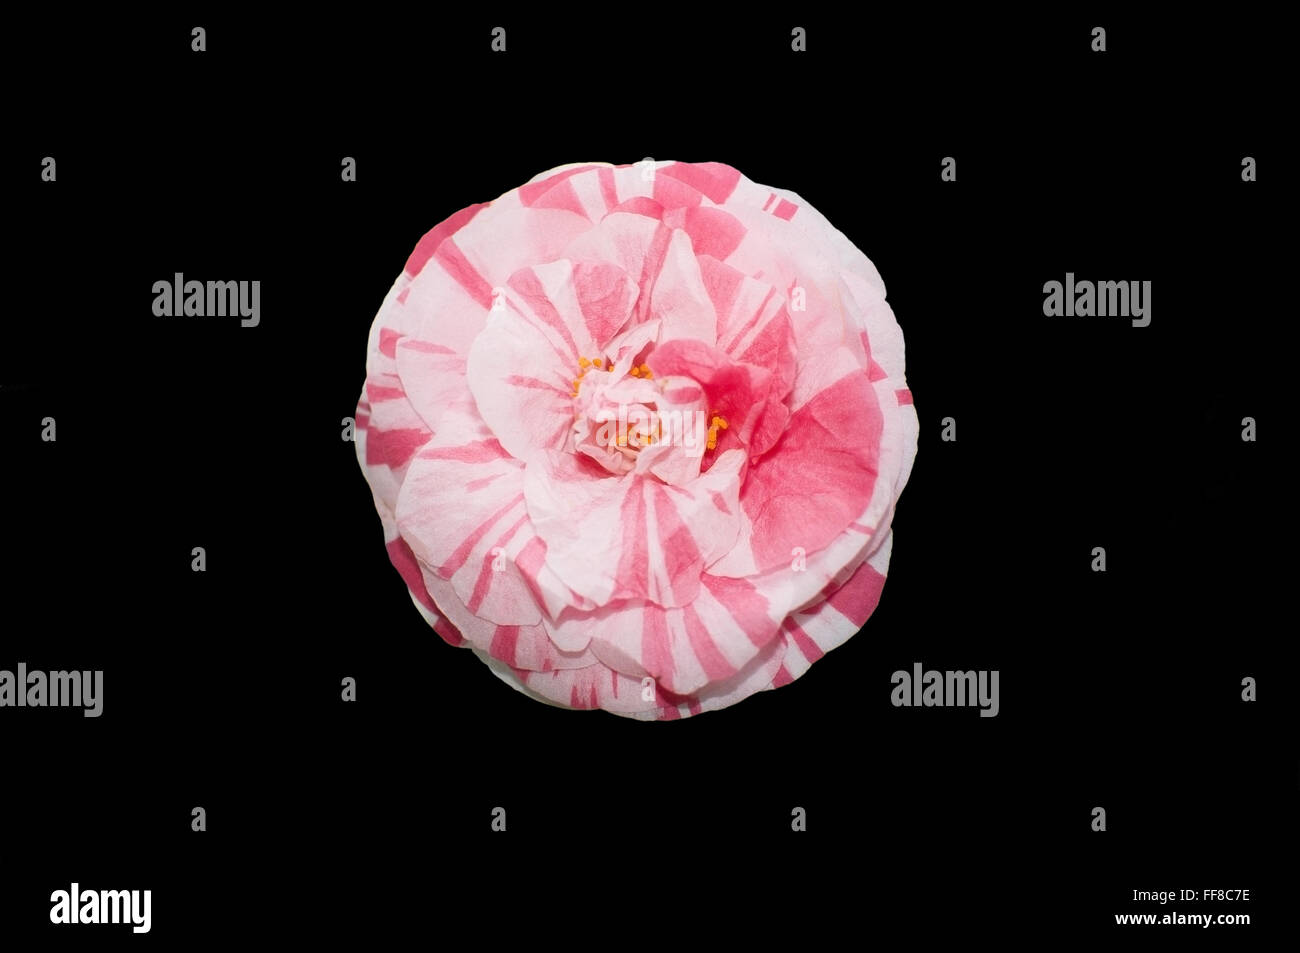 Red and white chamellia flower isolated on black. Stock Photo